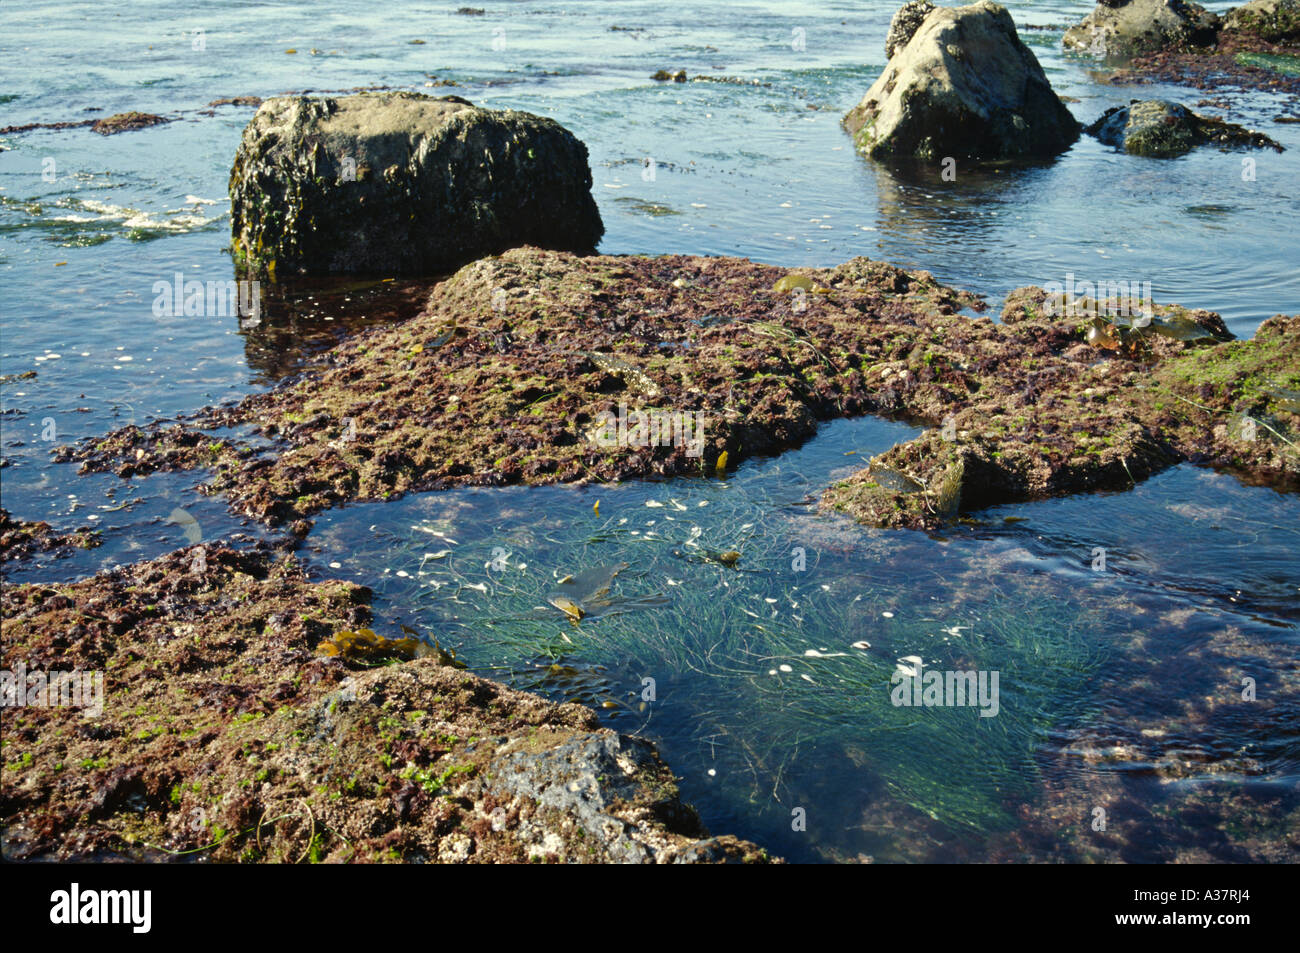 CALIFORNIA San Diego Tidal pools rocky intertidal area At low tide seaweed moss on rocks Cabrillo National Monument Stock Photo